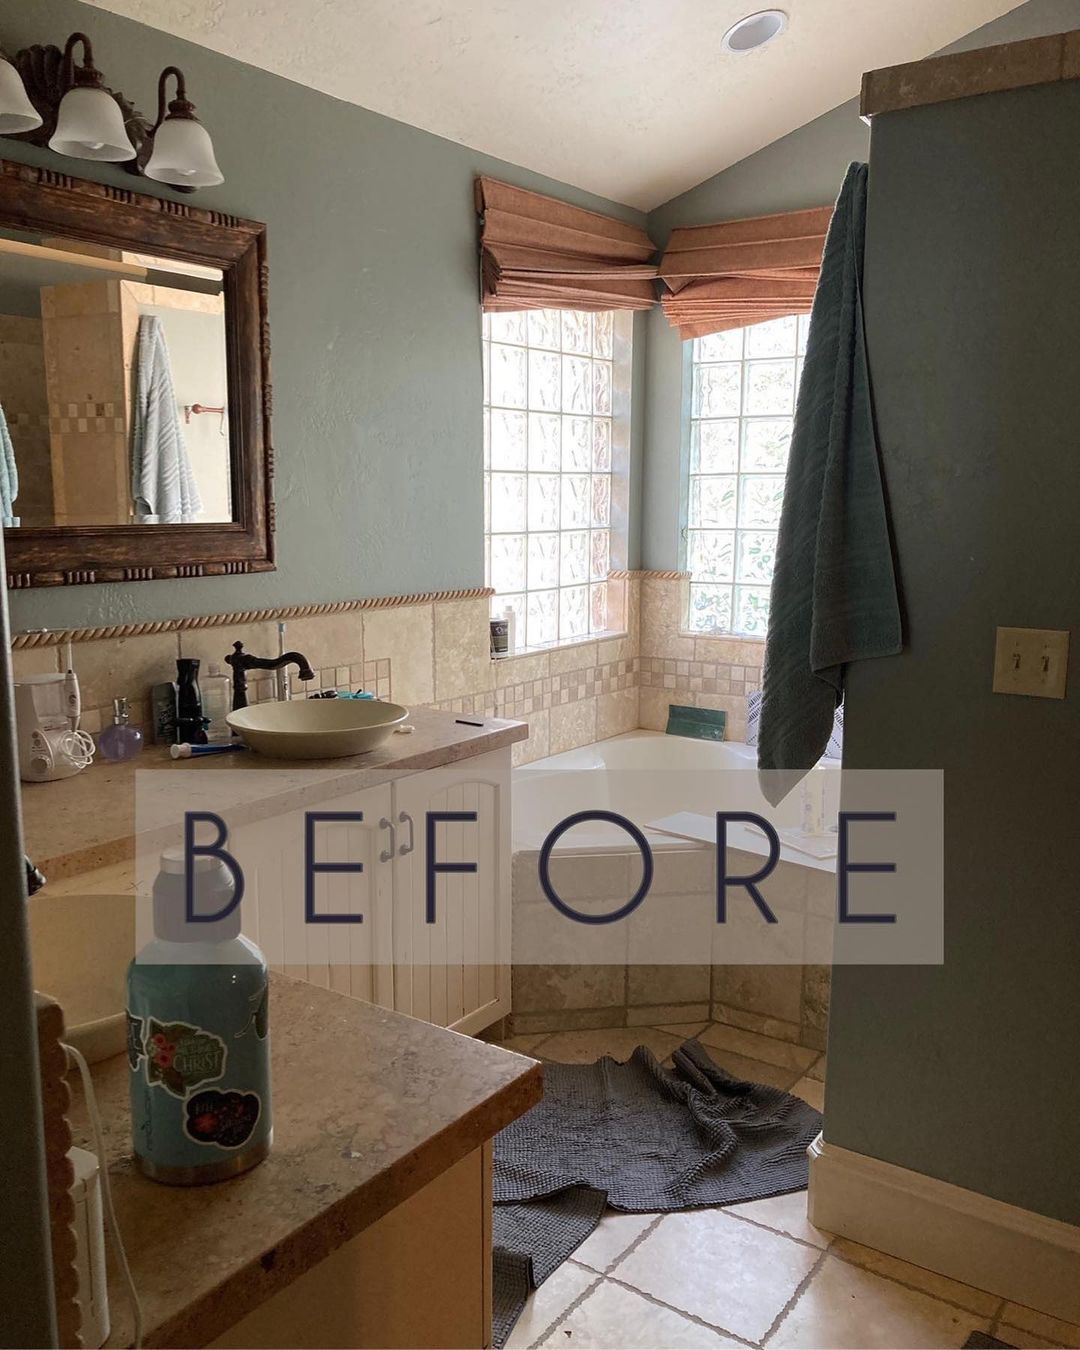 https://cdn.shopify.com/s/files/1/0604/6833/0665/files/bathroom_remodel_before_and_after_2.jpg?v=1678845445